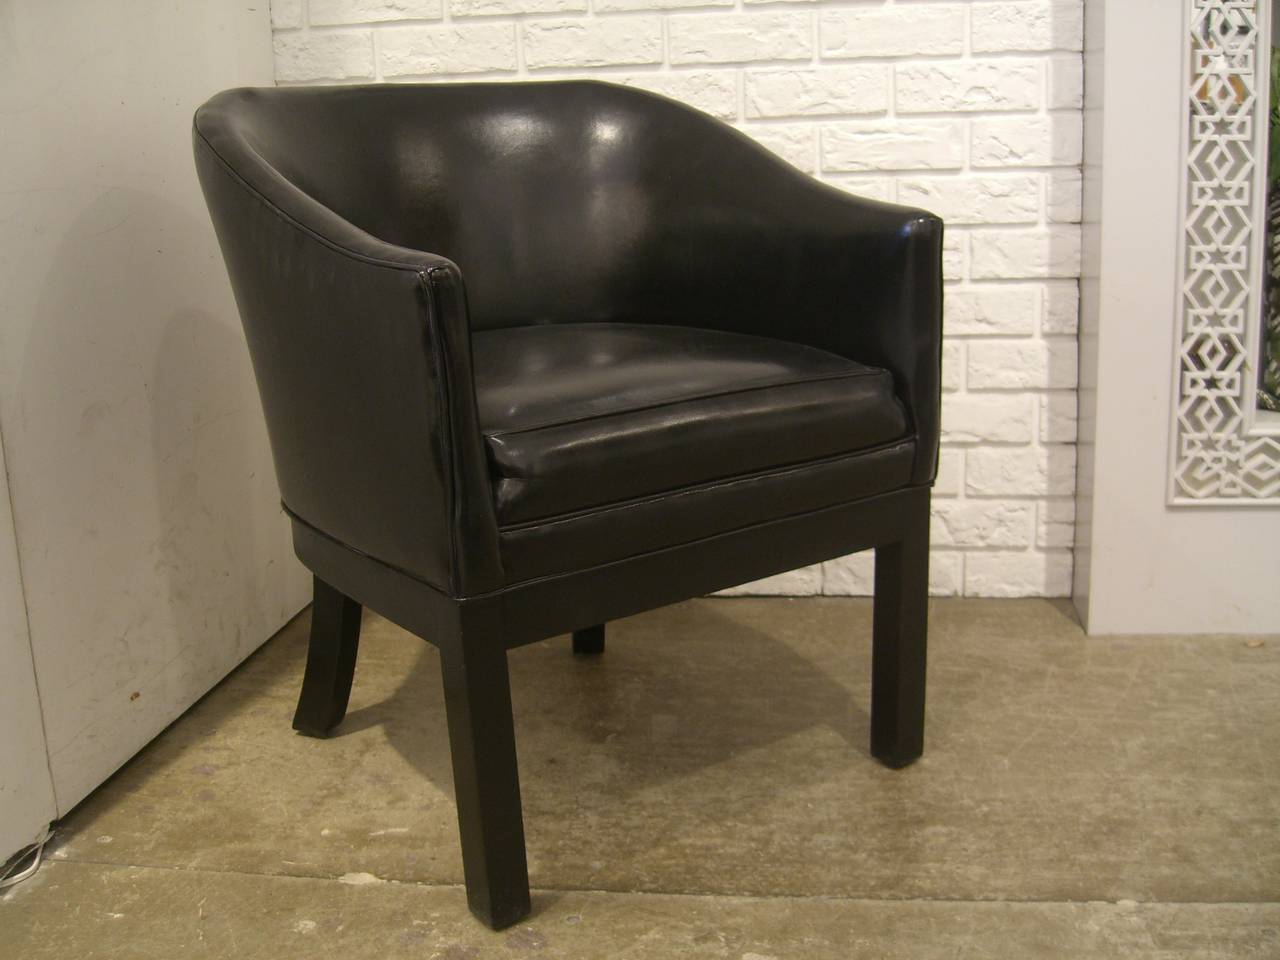 Black vinyl occasional chair with black legs.